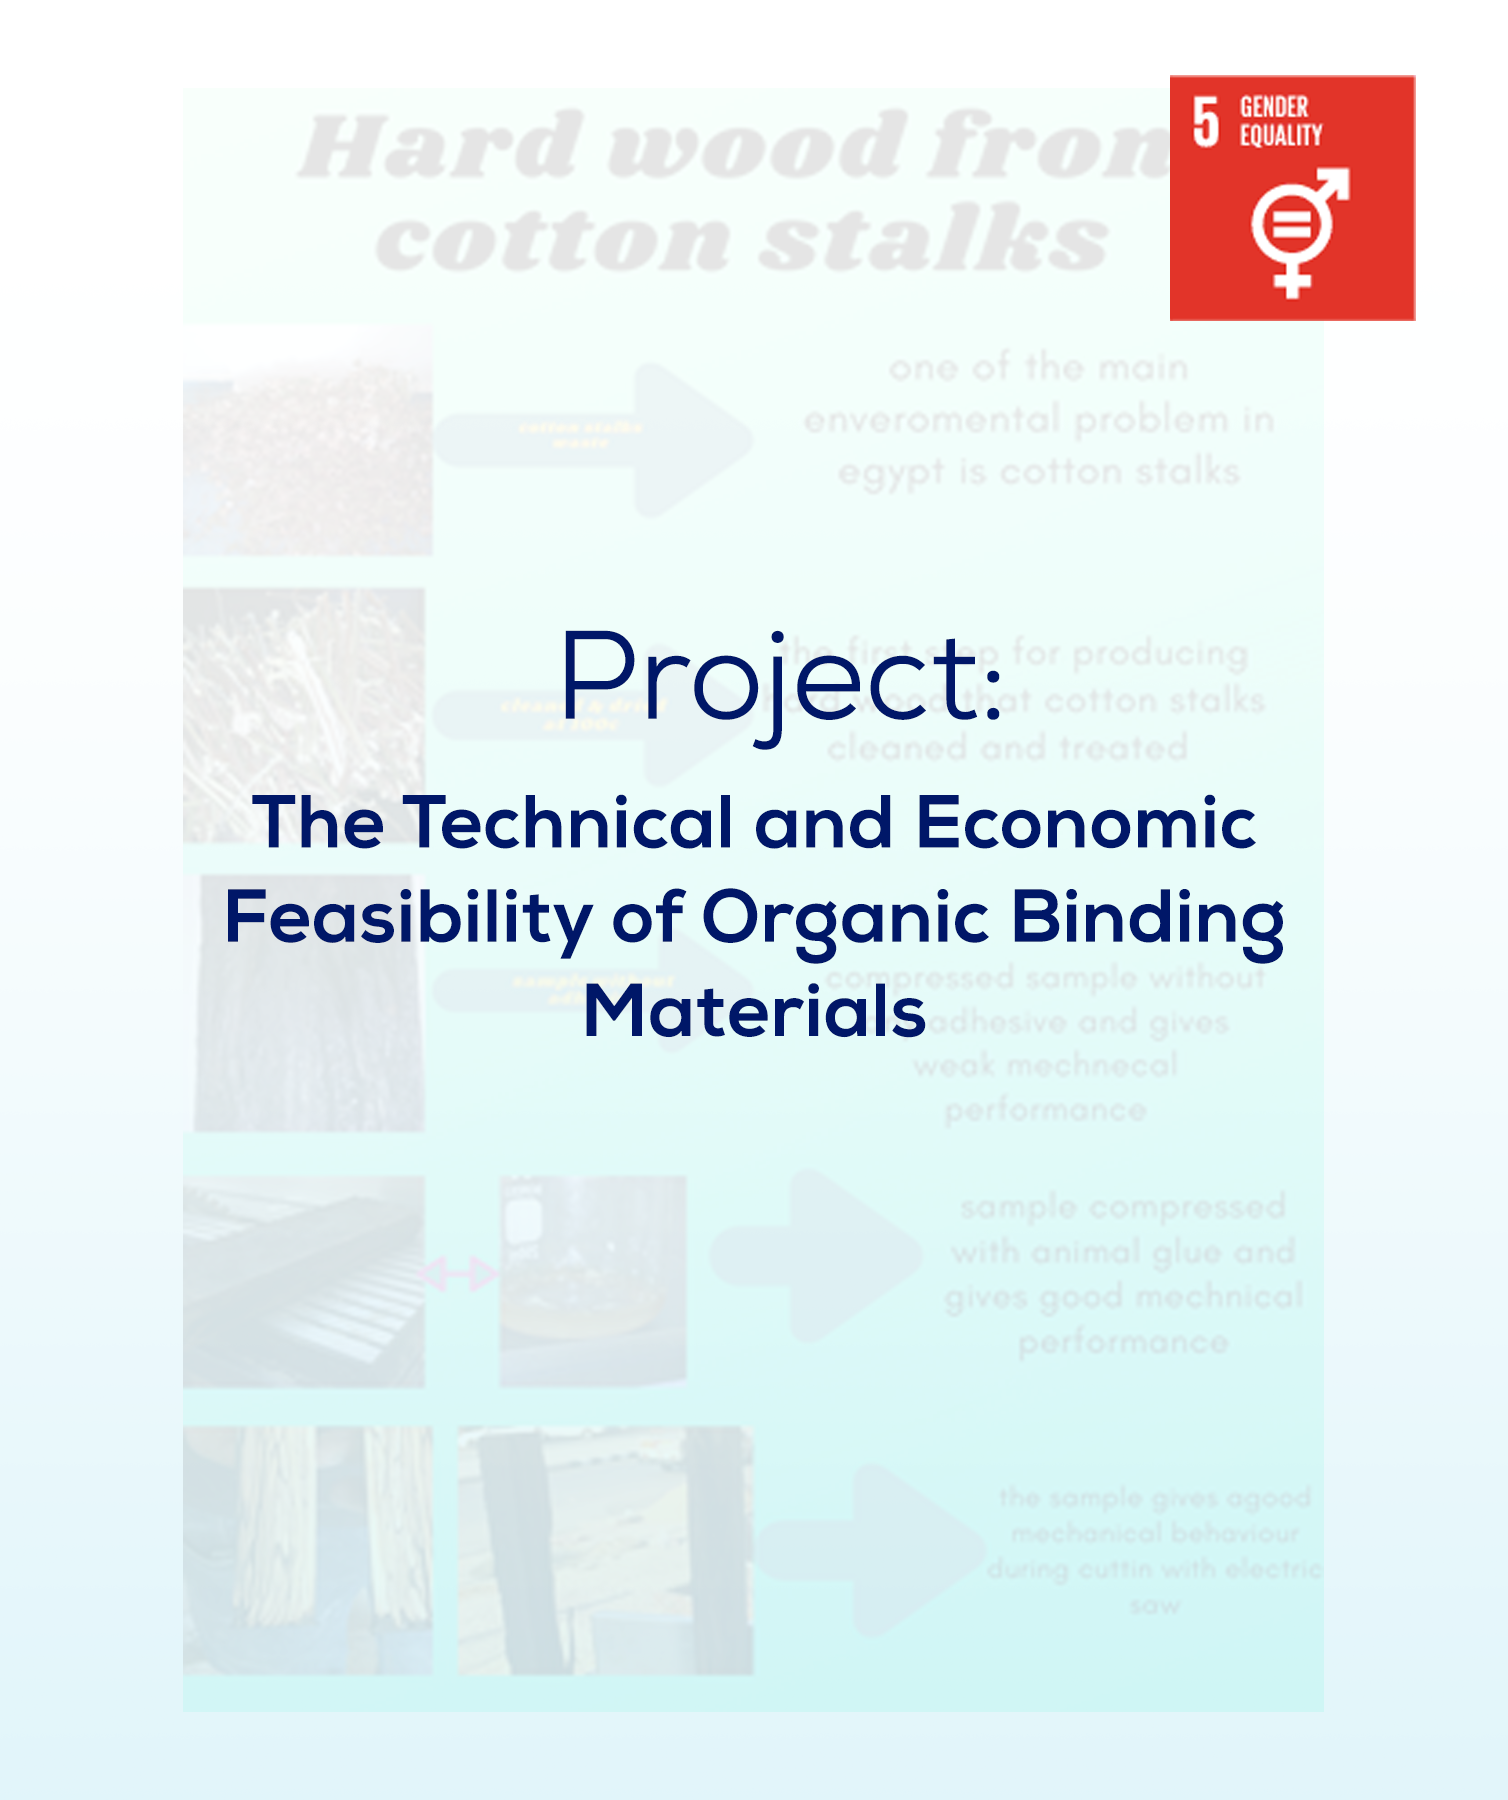 The Technical and Economic Feasibility of Organic Binding Materials 